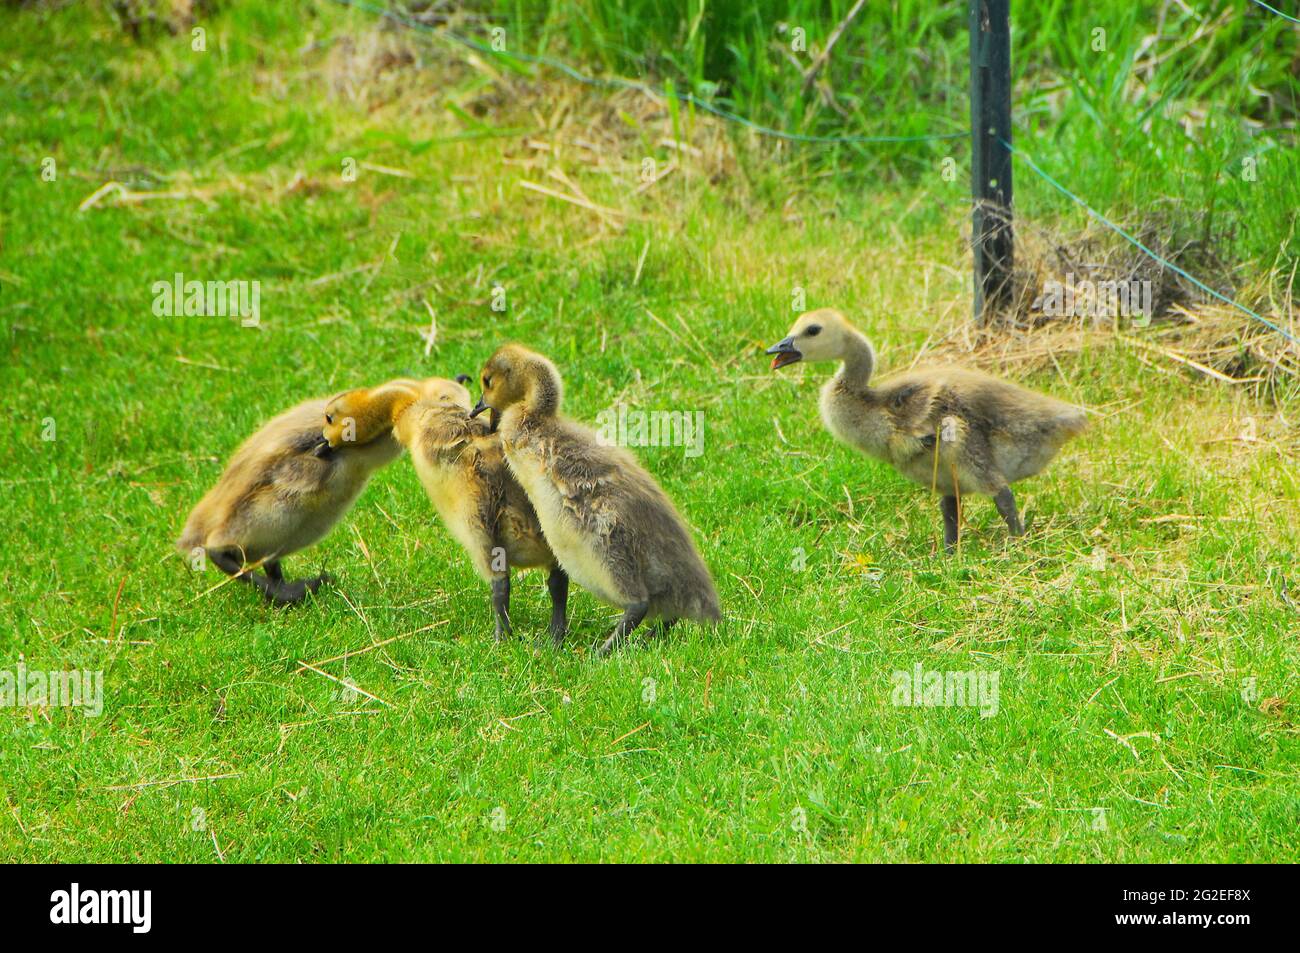 Three Canadian geese goslings fighting and biting each other as a fourth gosling comes to join in the fight, on a spring day in Ontario, Canada. Stock Photo